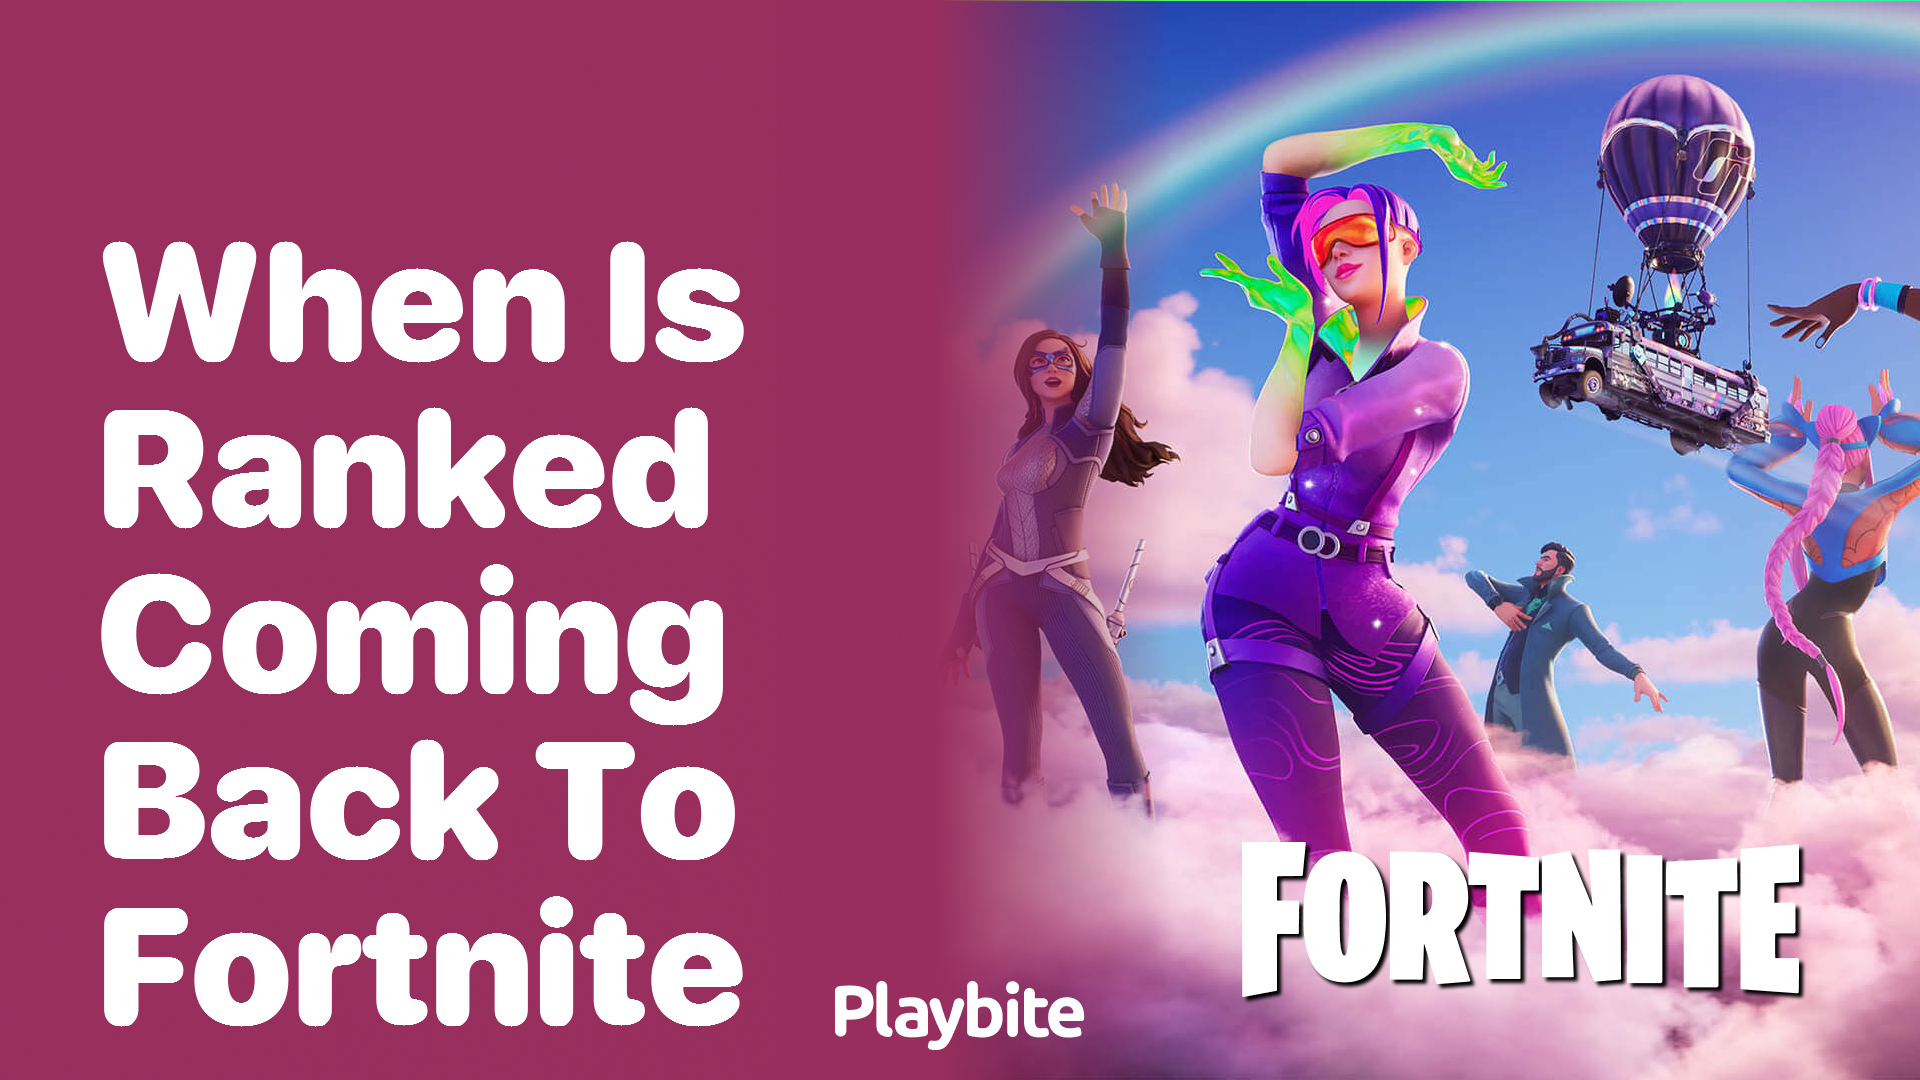 When is Ranked Coming Back to Fortnite?